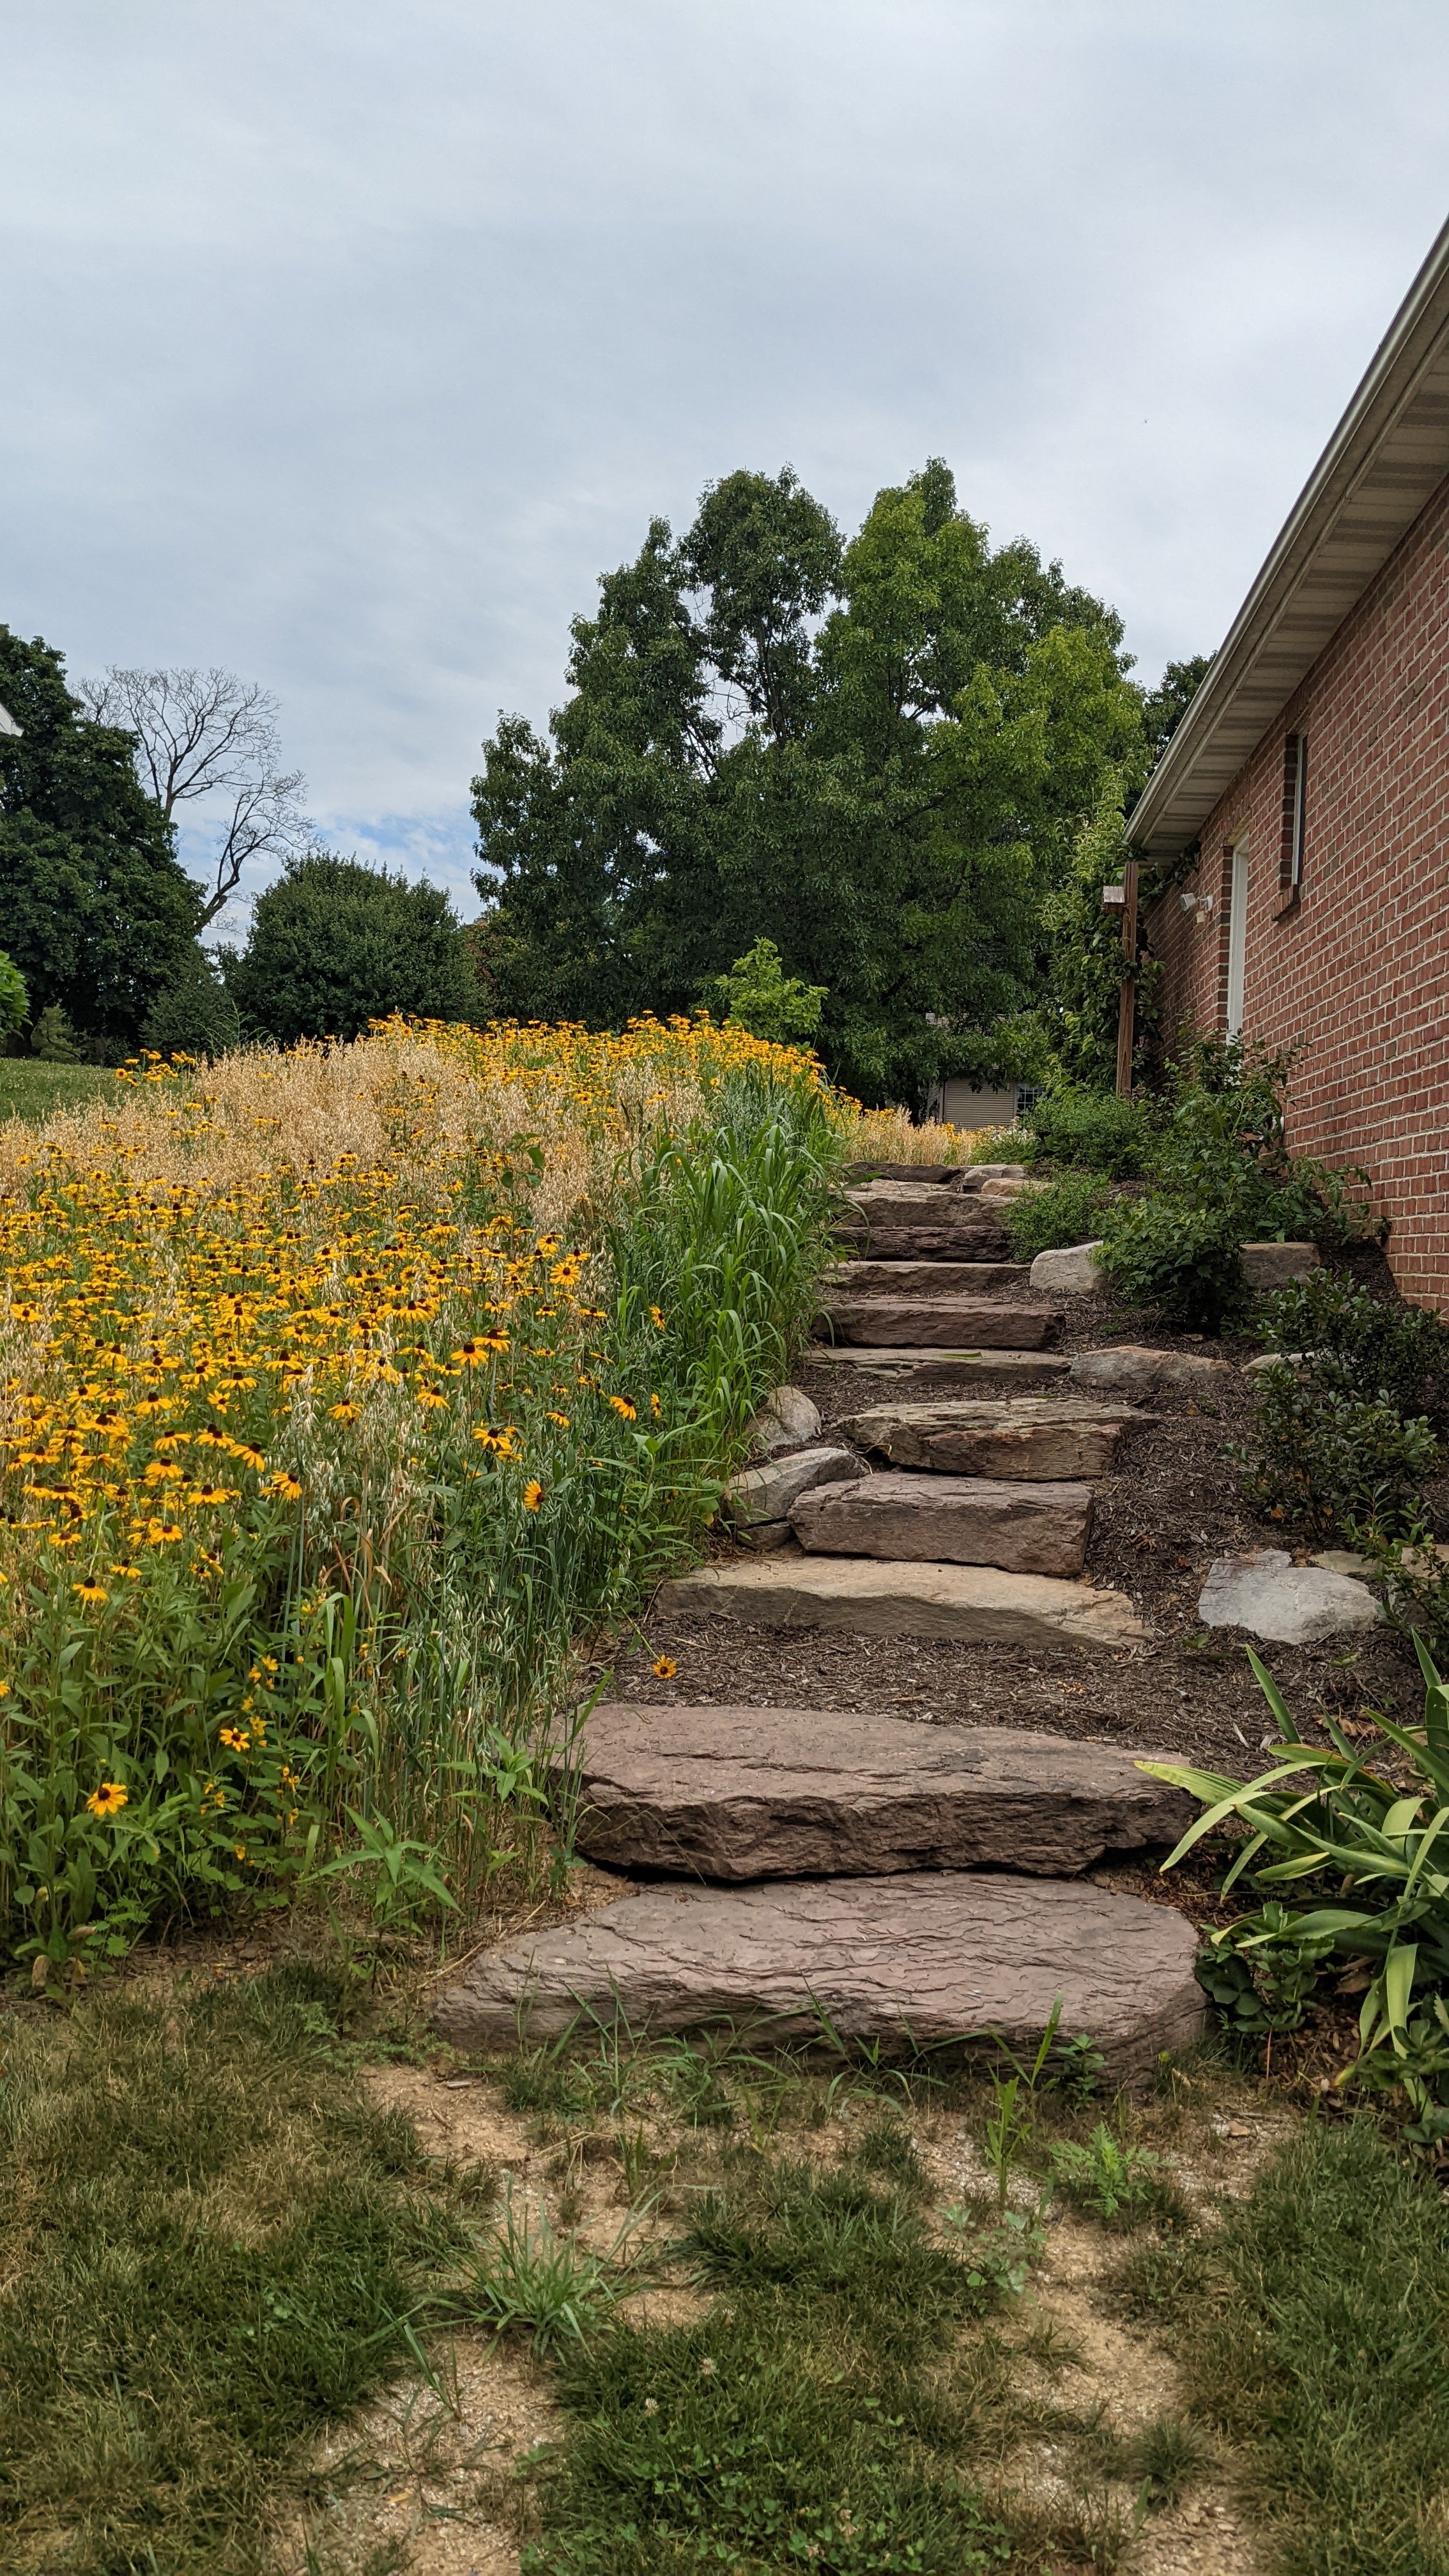 Stairs lead viewers beside the impressive meadow garden.